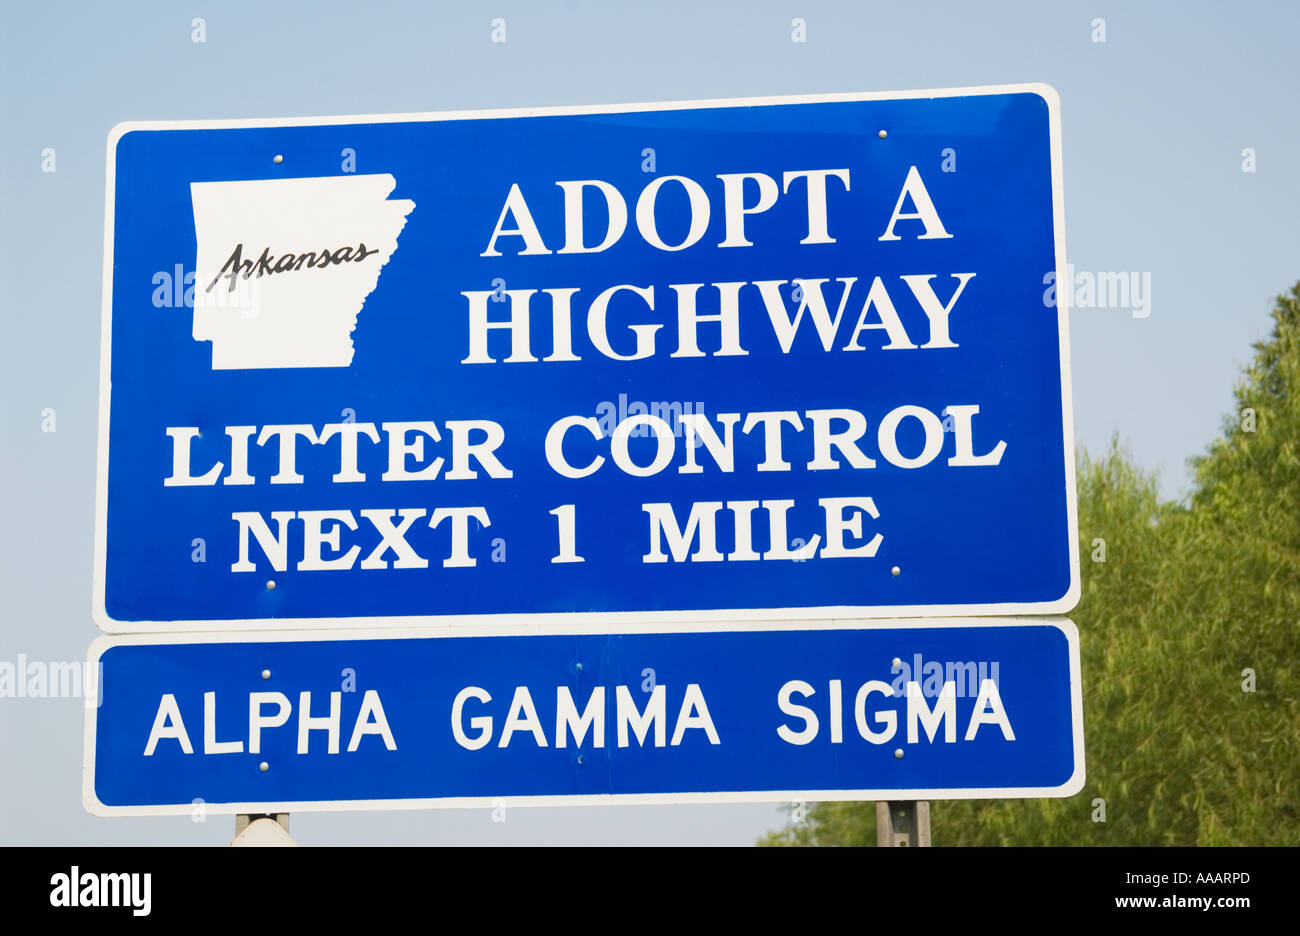 Arkansas Adopt a Highway Sign for Litter Control USA Stock Photo - Alamy